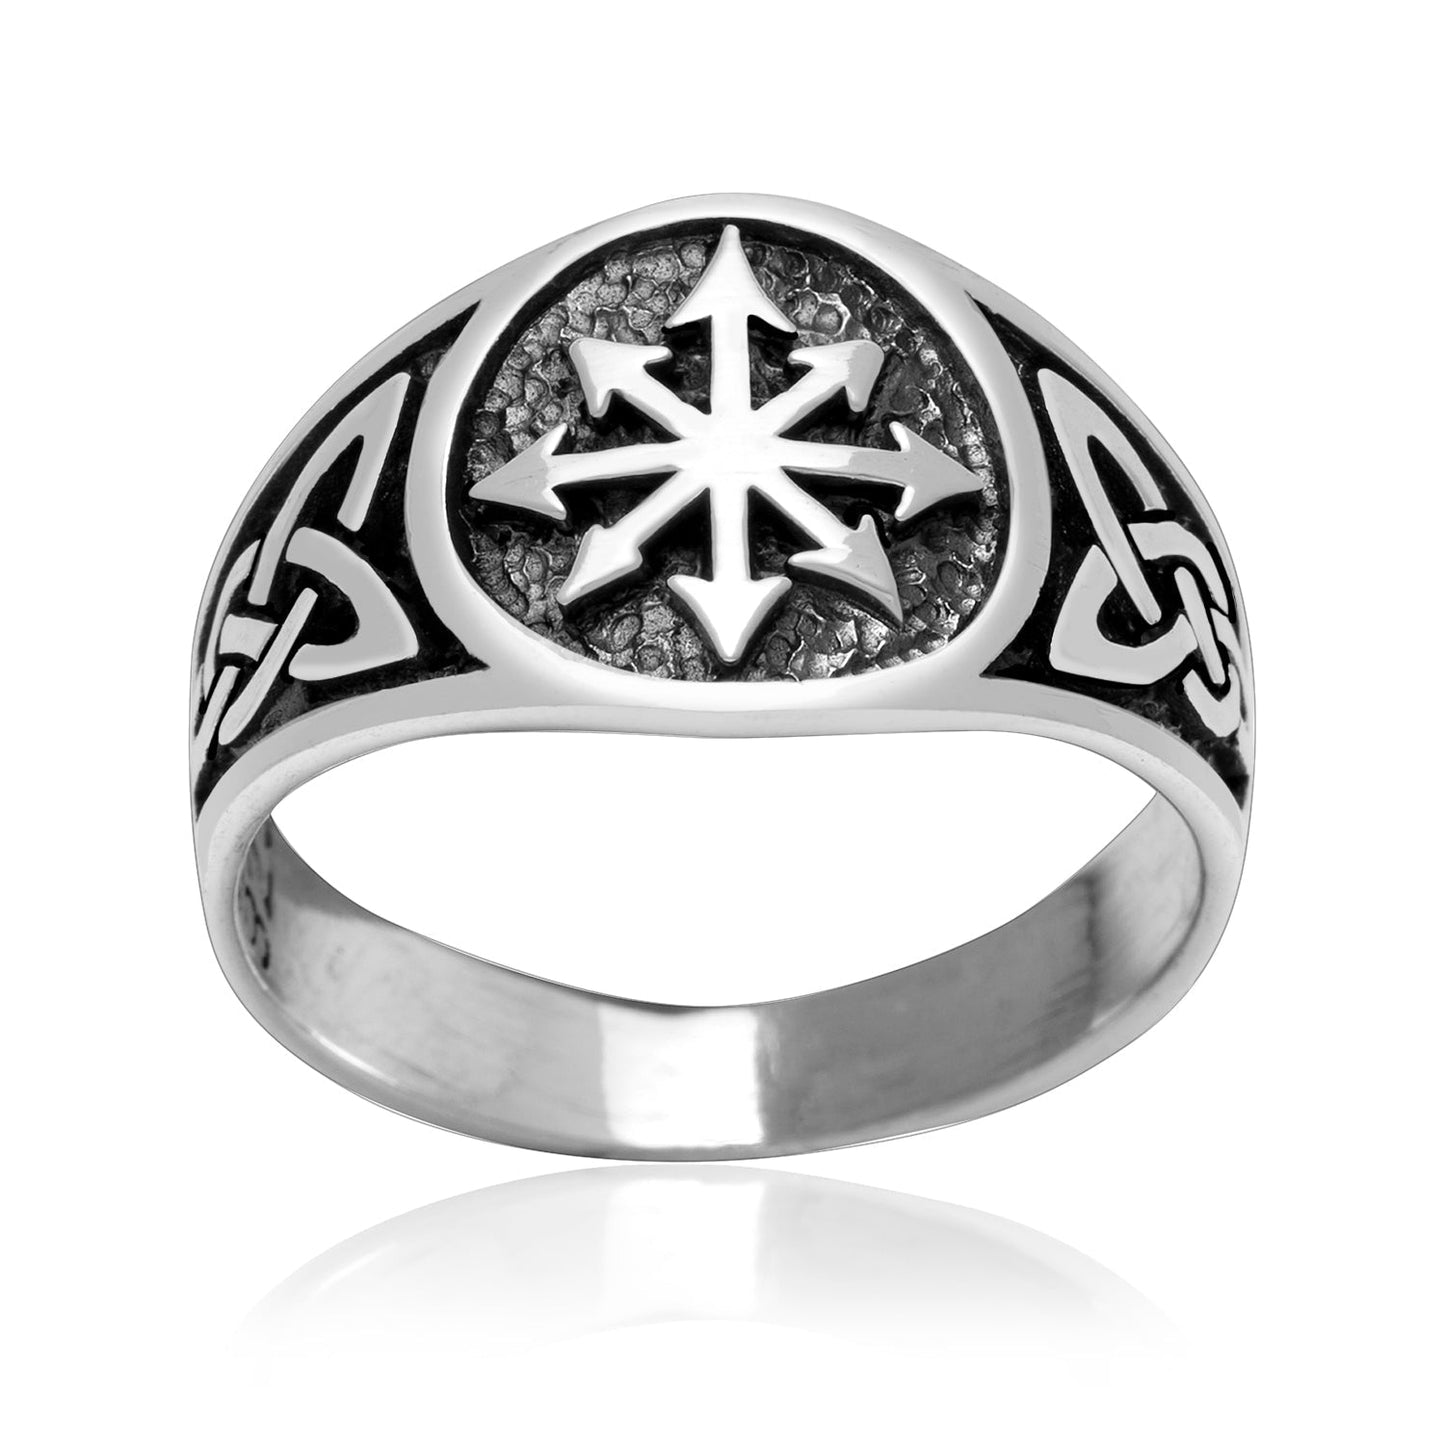 925 Sterling Silver Symbol of Chaos Occult Ring - SilverMania925